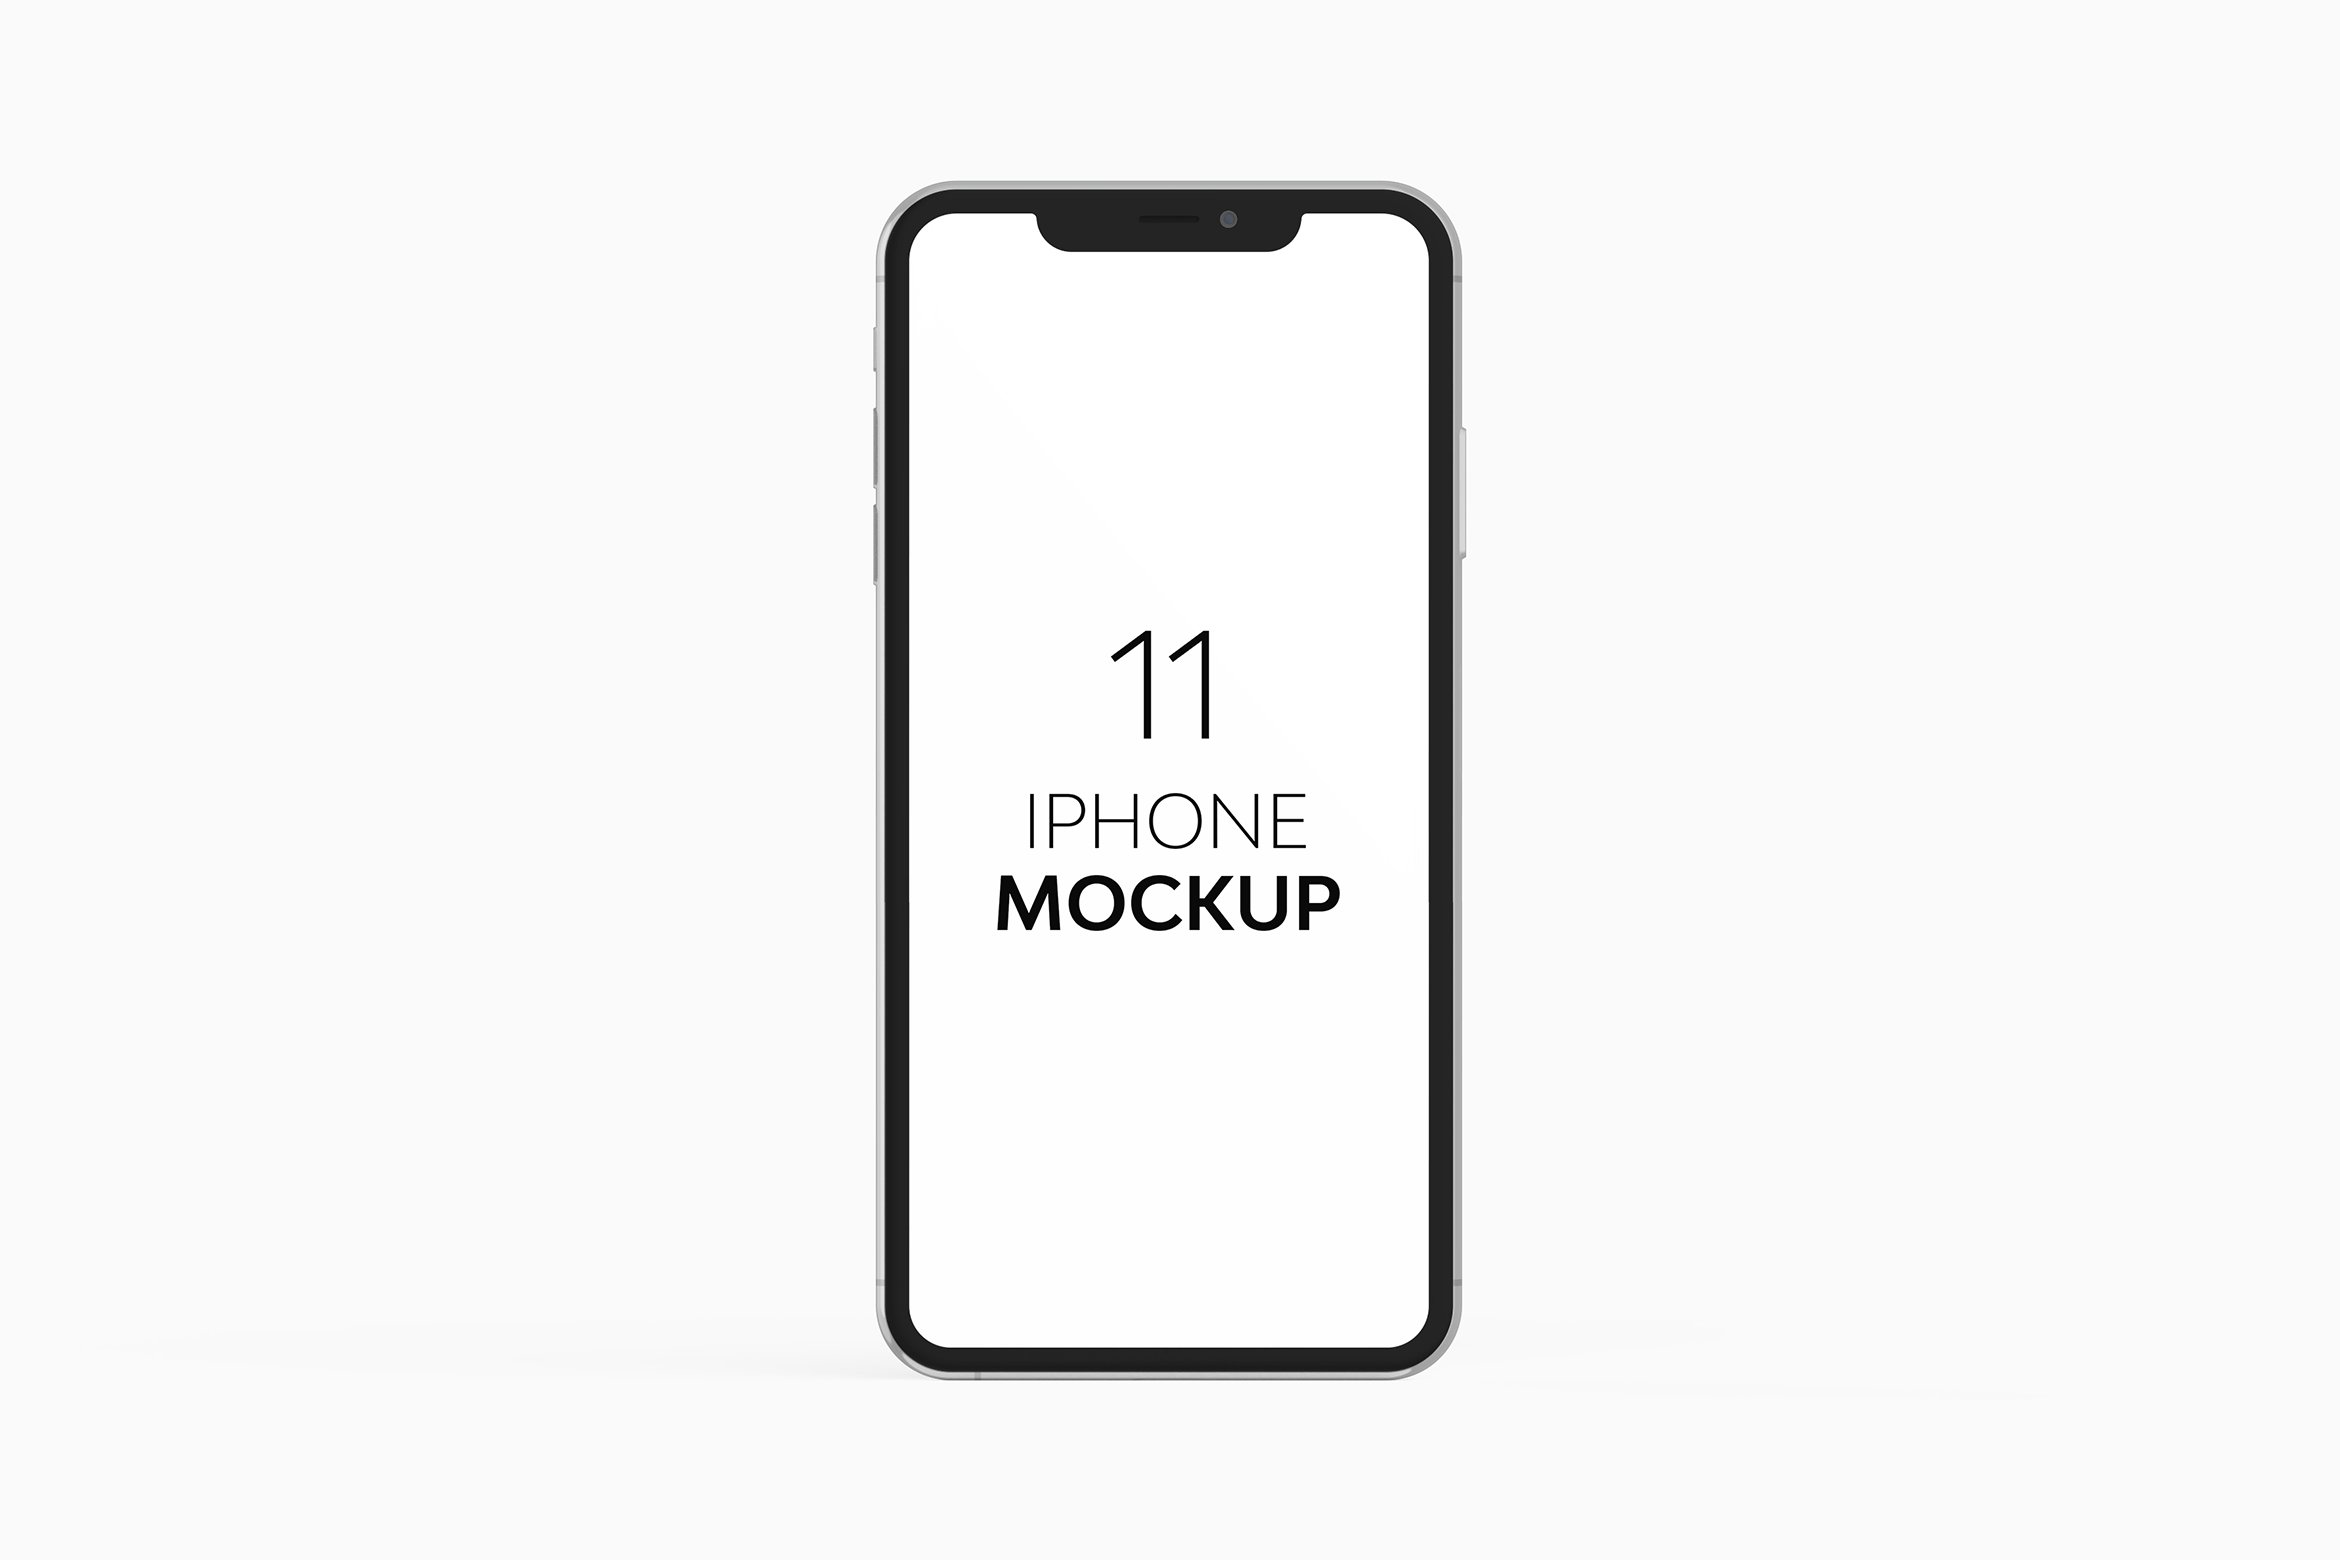 iPhone 11 Mockup cover image.